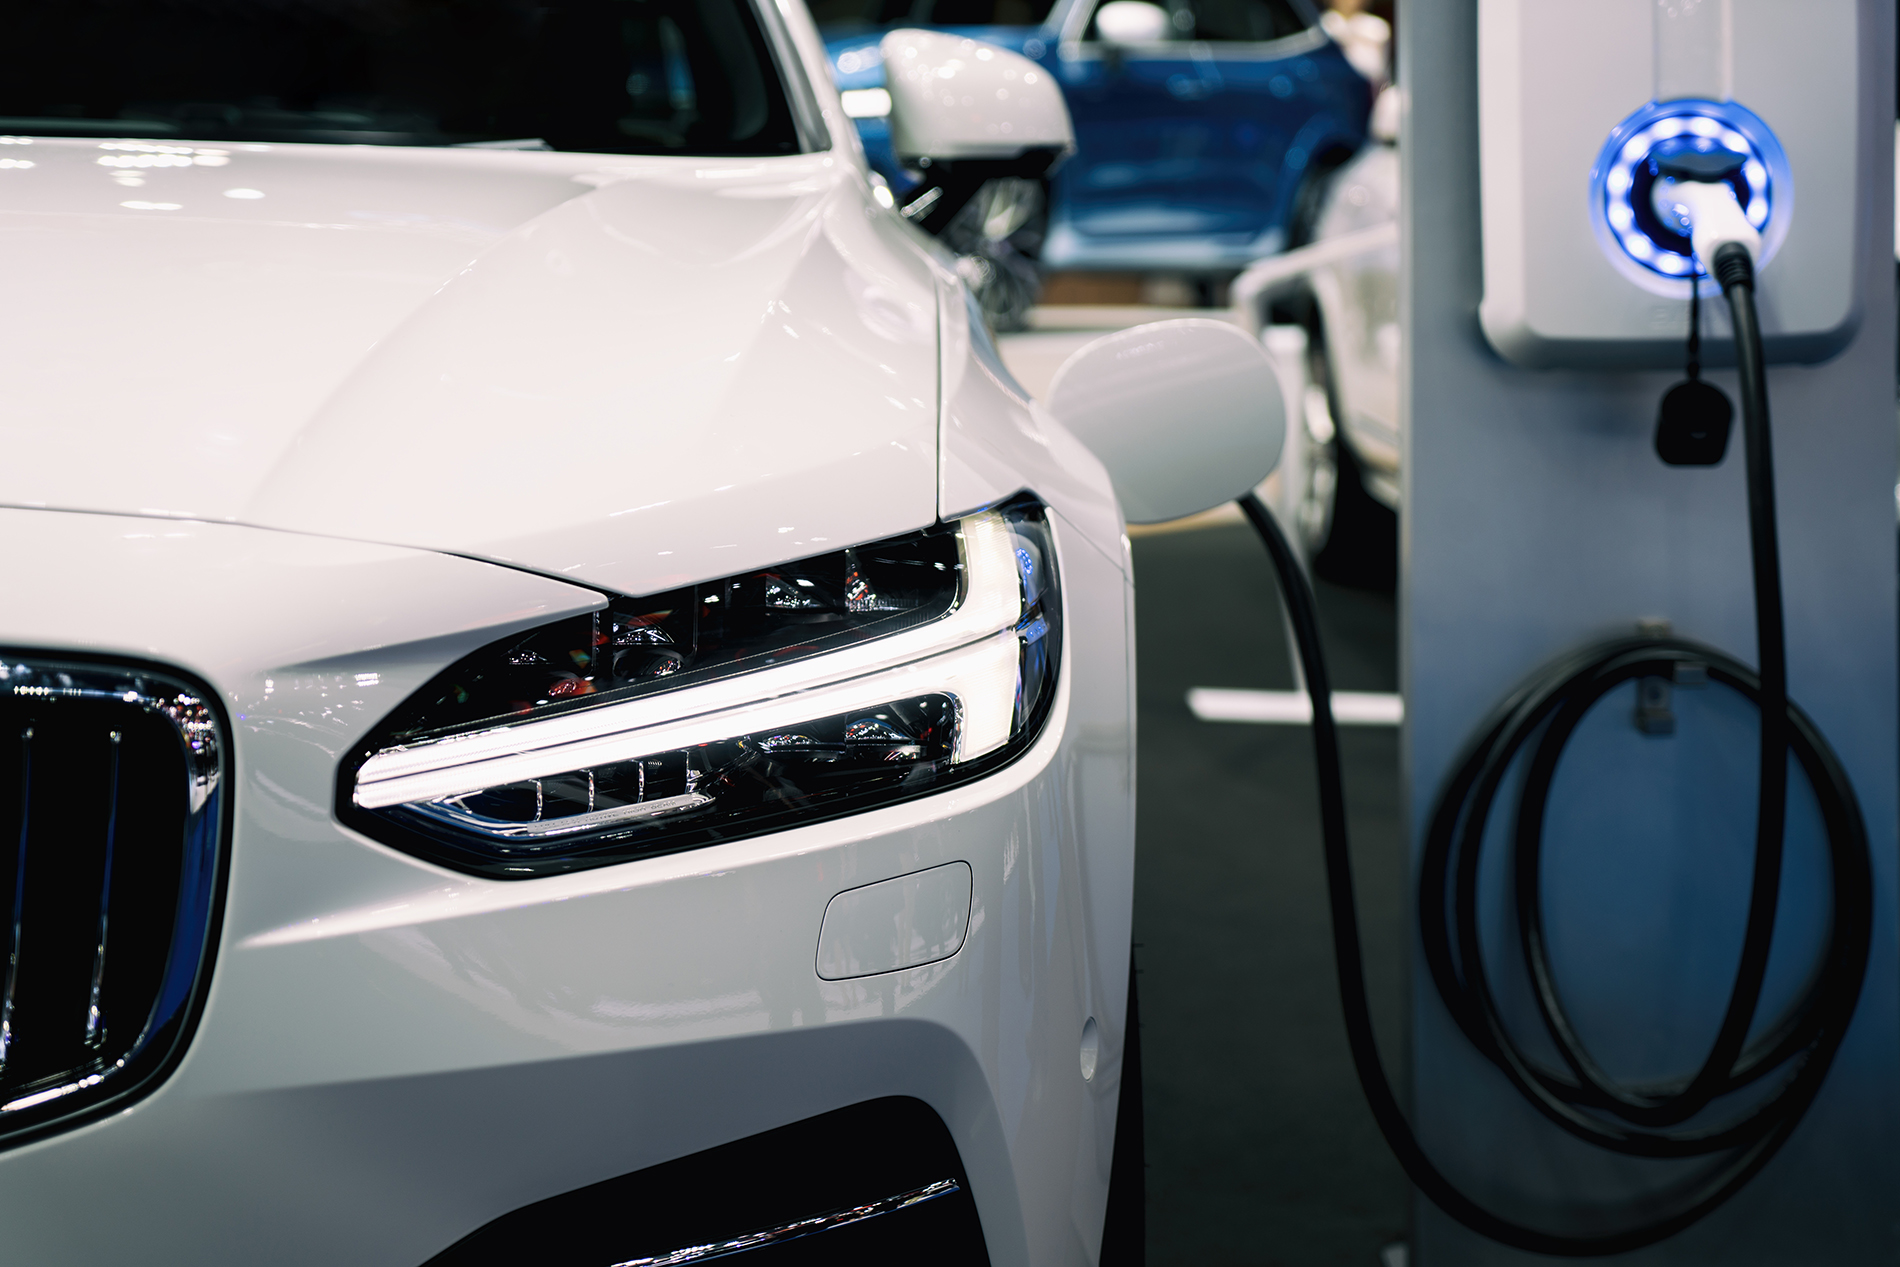 Key considerations for buying an electric or hybrid car